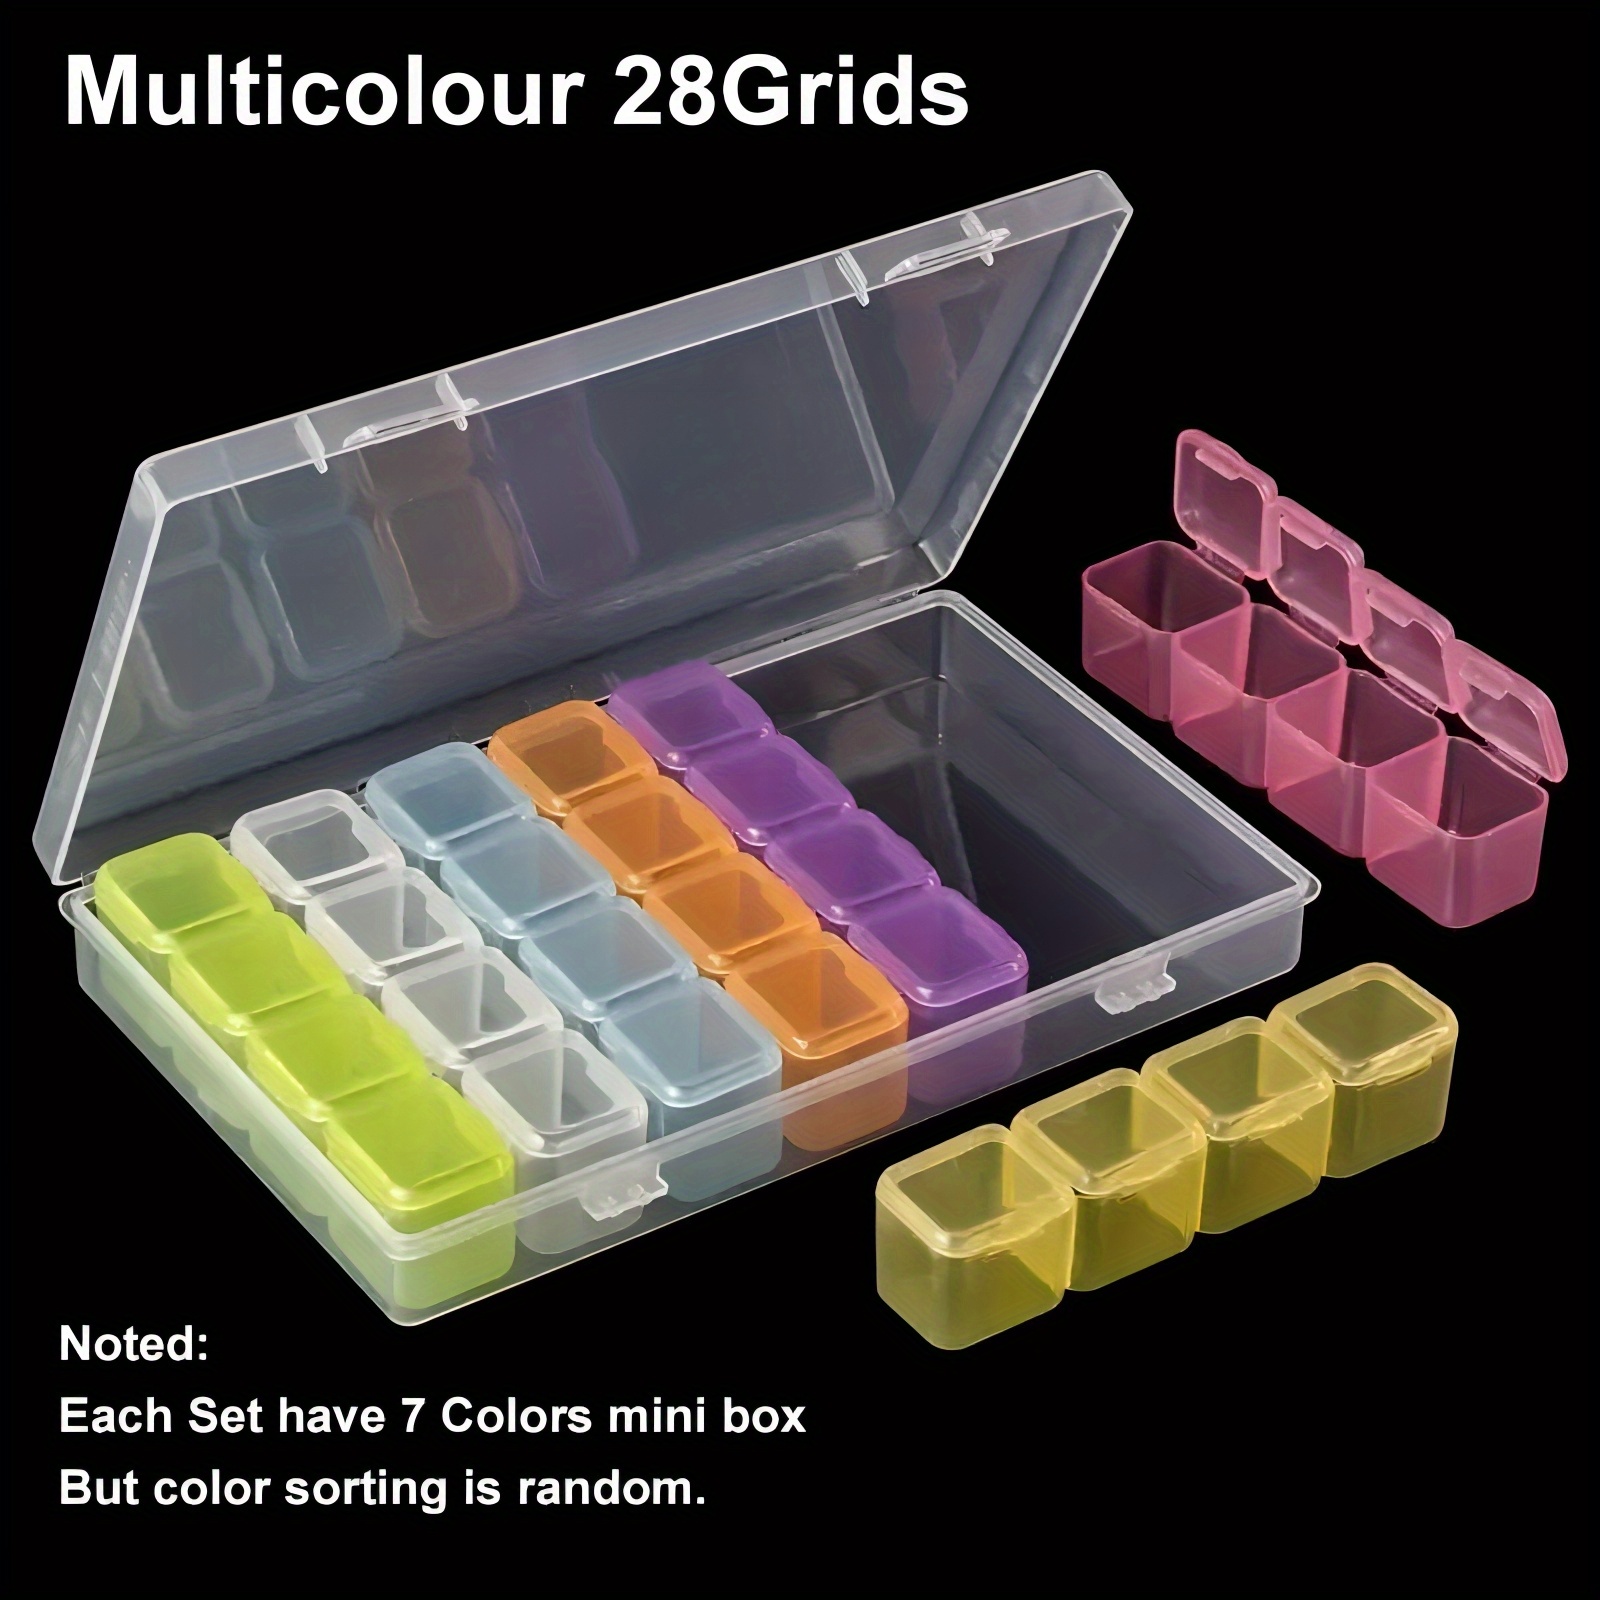 Sewing Basket Bead Organizers and Storage Adjustable Compartments Bead  Storage Containers Diamond Painting Storage Jewelry Making Kits Organizer  for